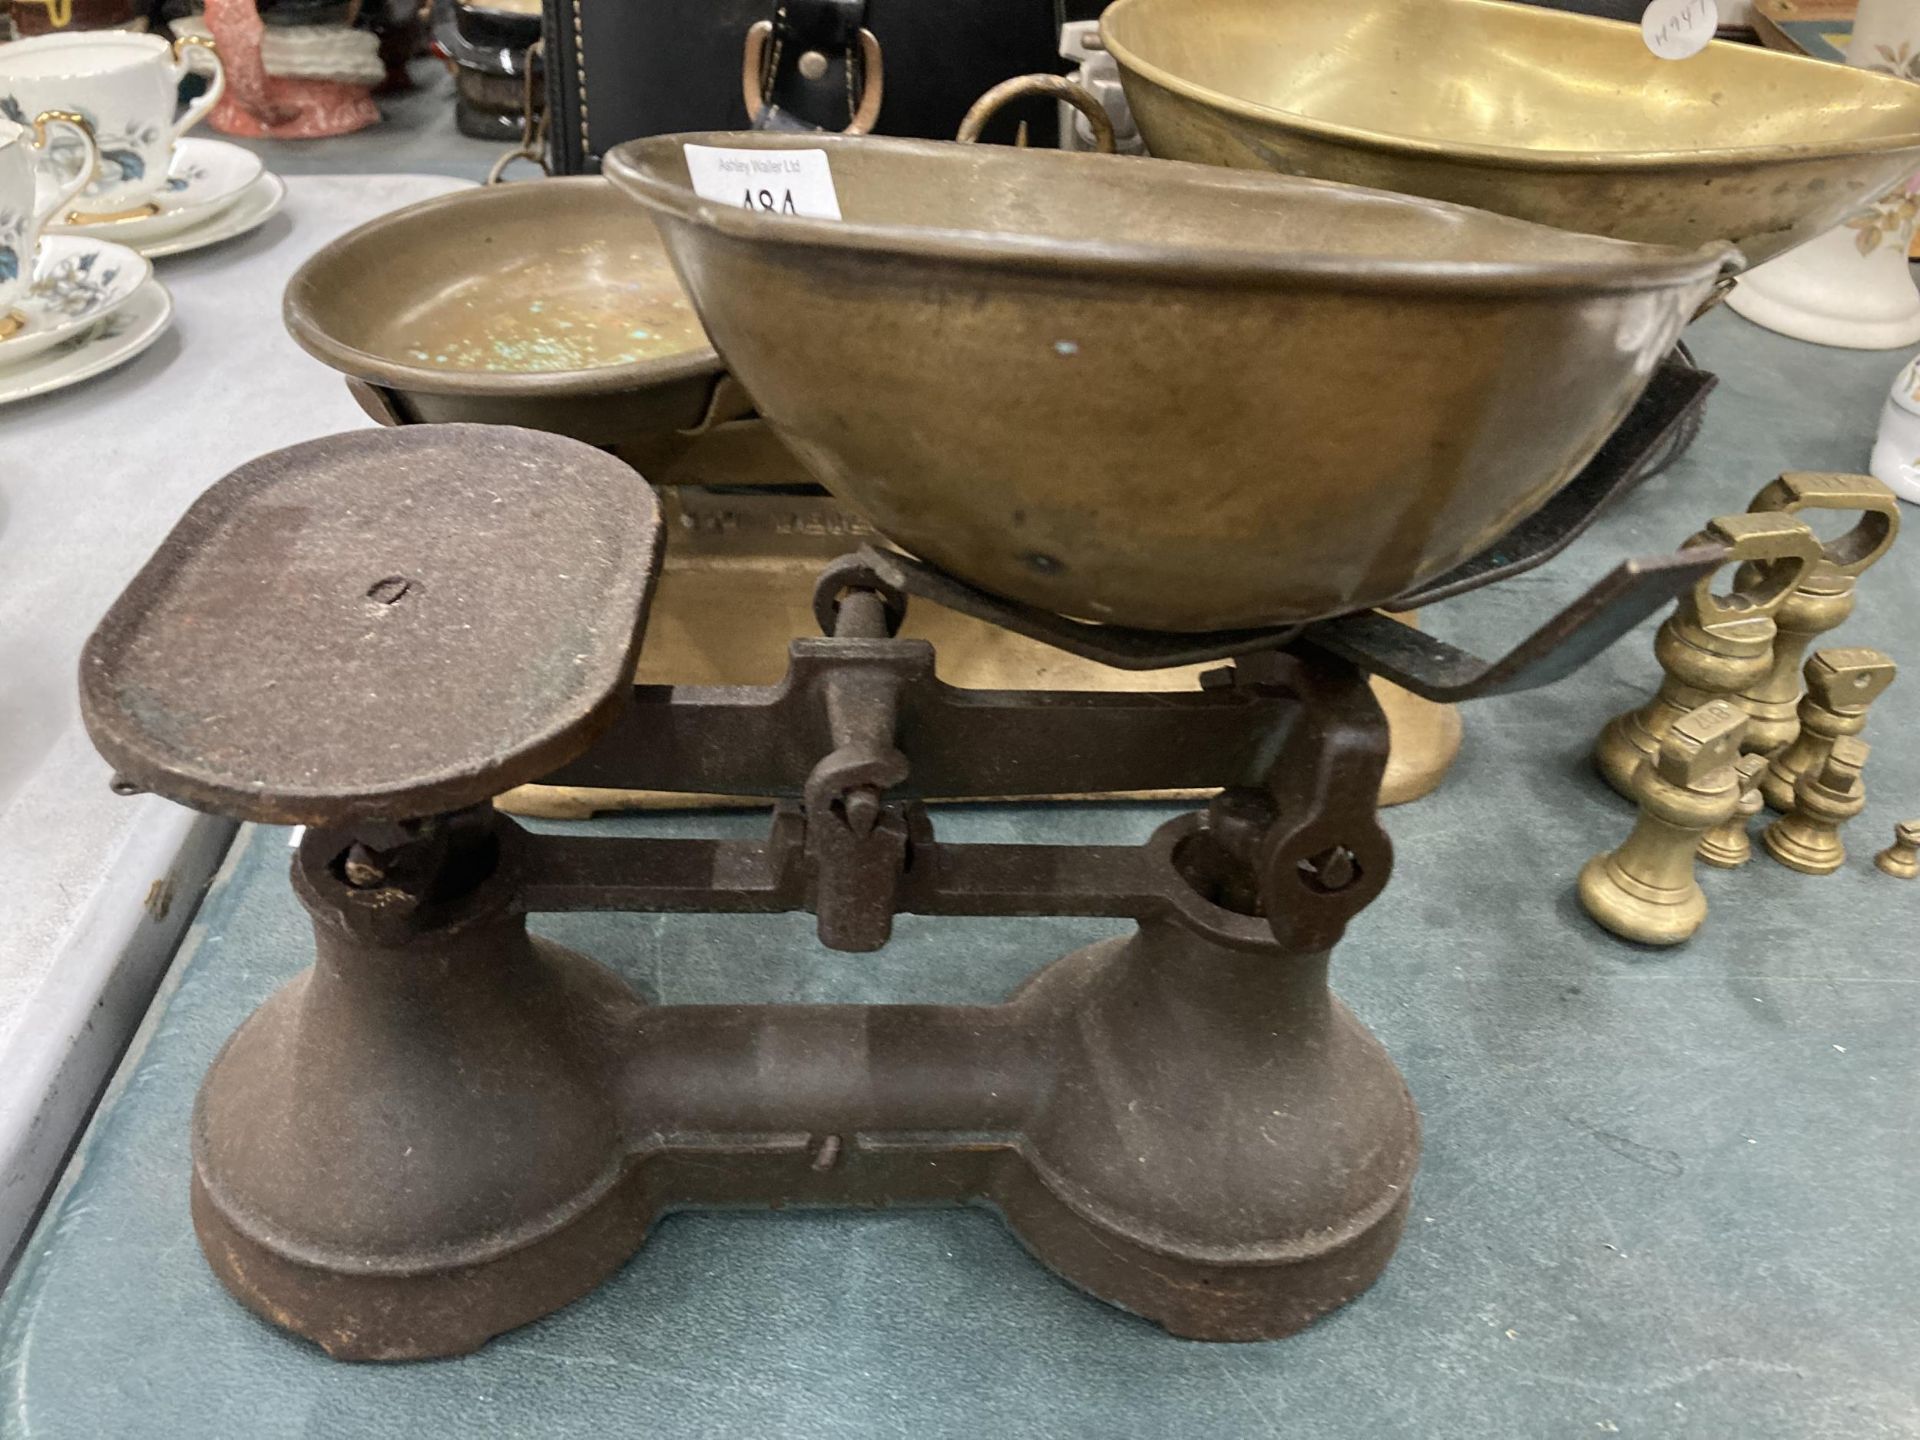 TWO SETS OF VINTAGE BRASS SCALES, ONE WITH WEIGHTS - Image 2 of 4